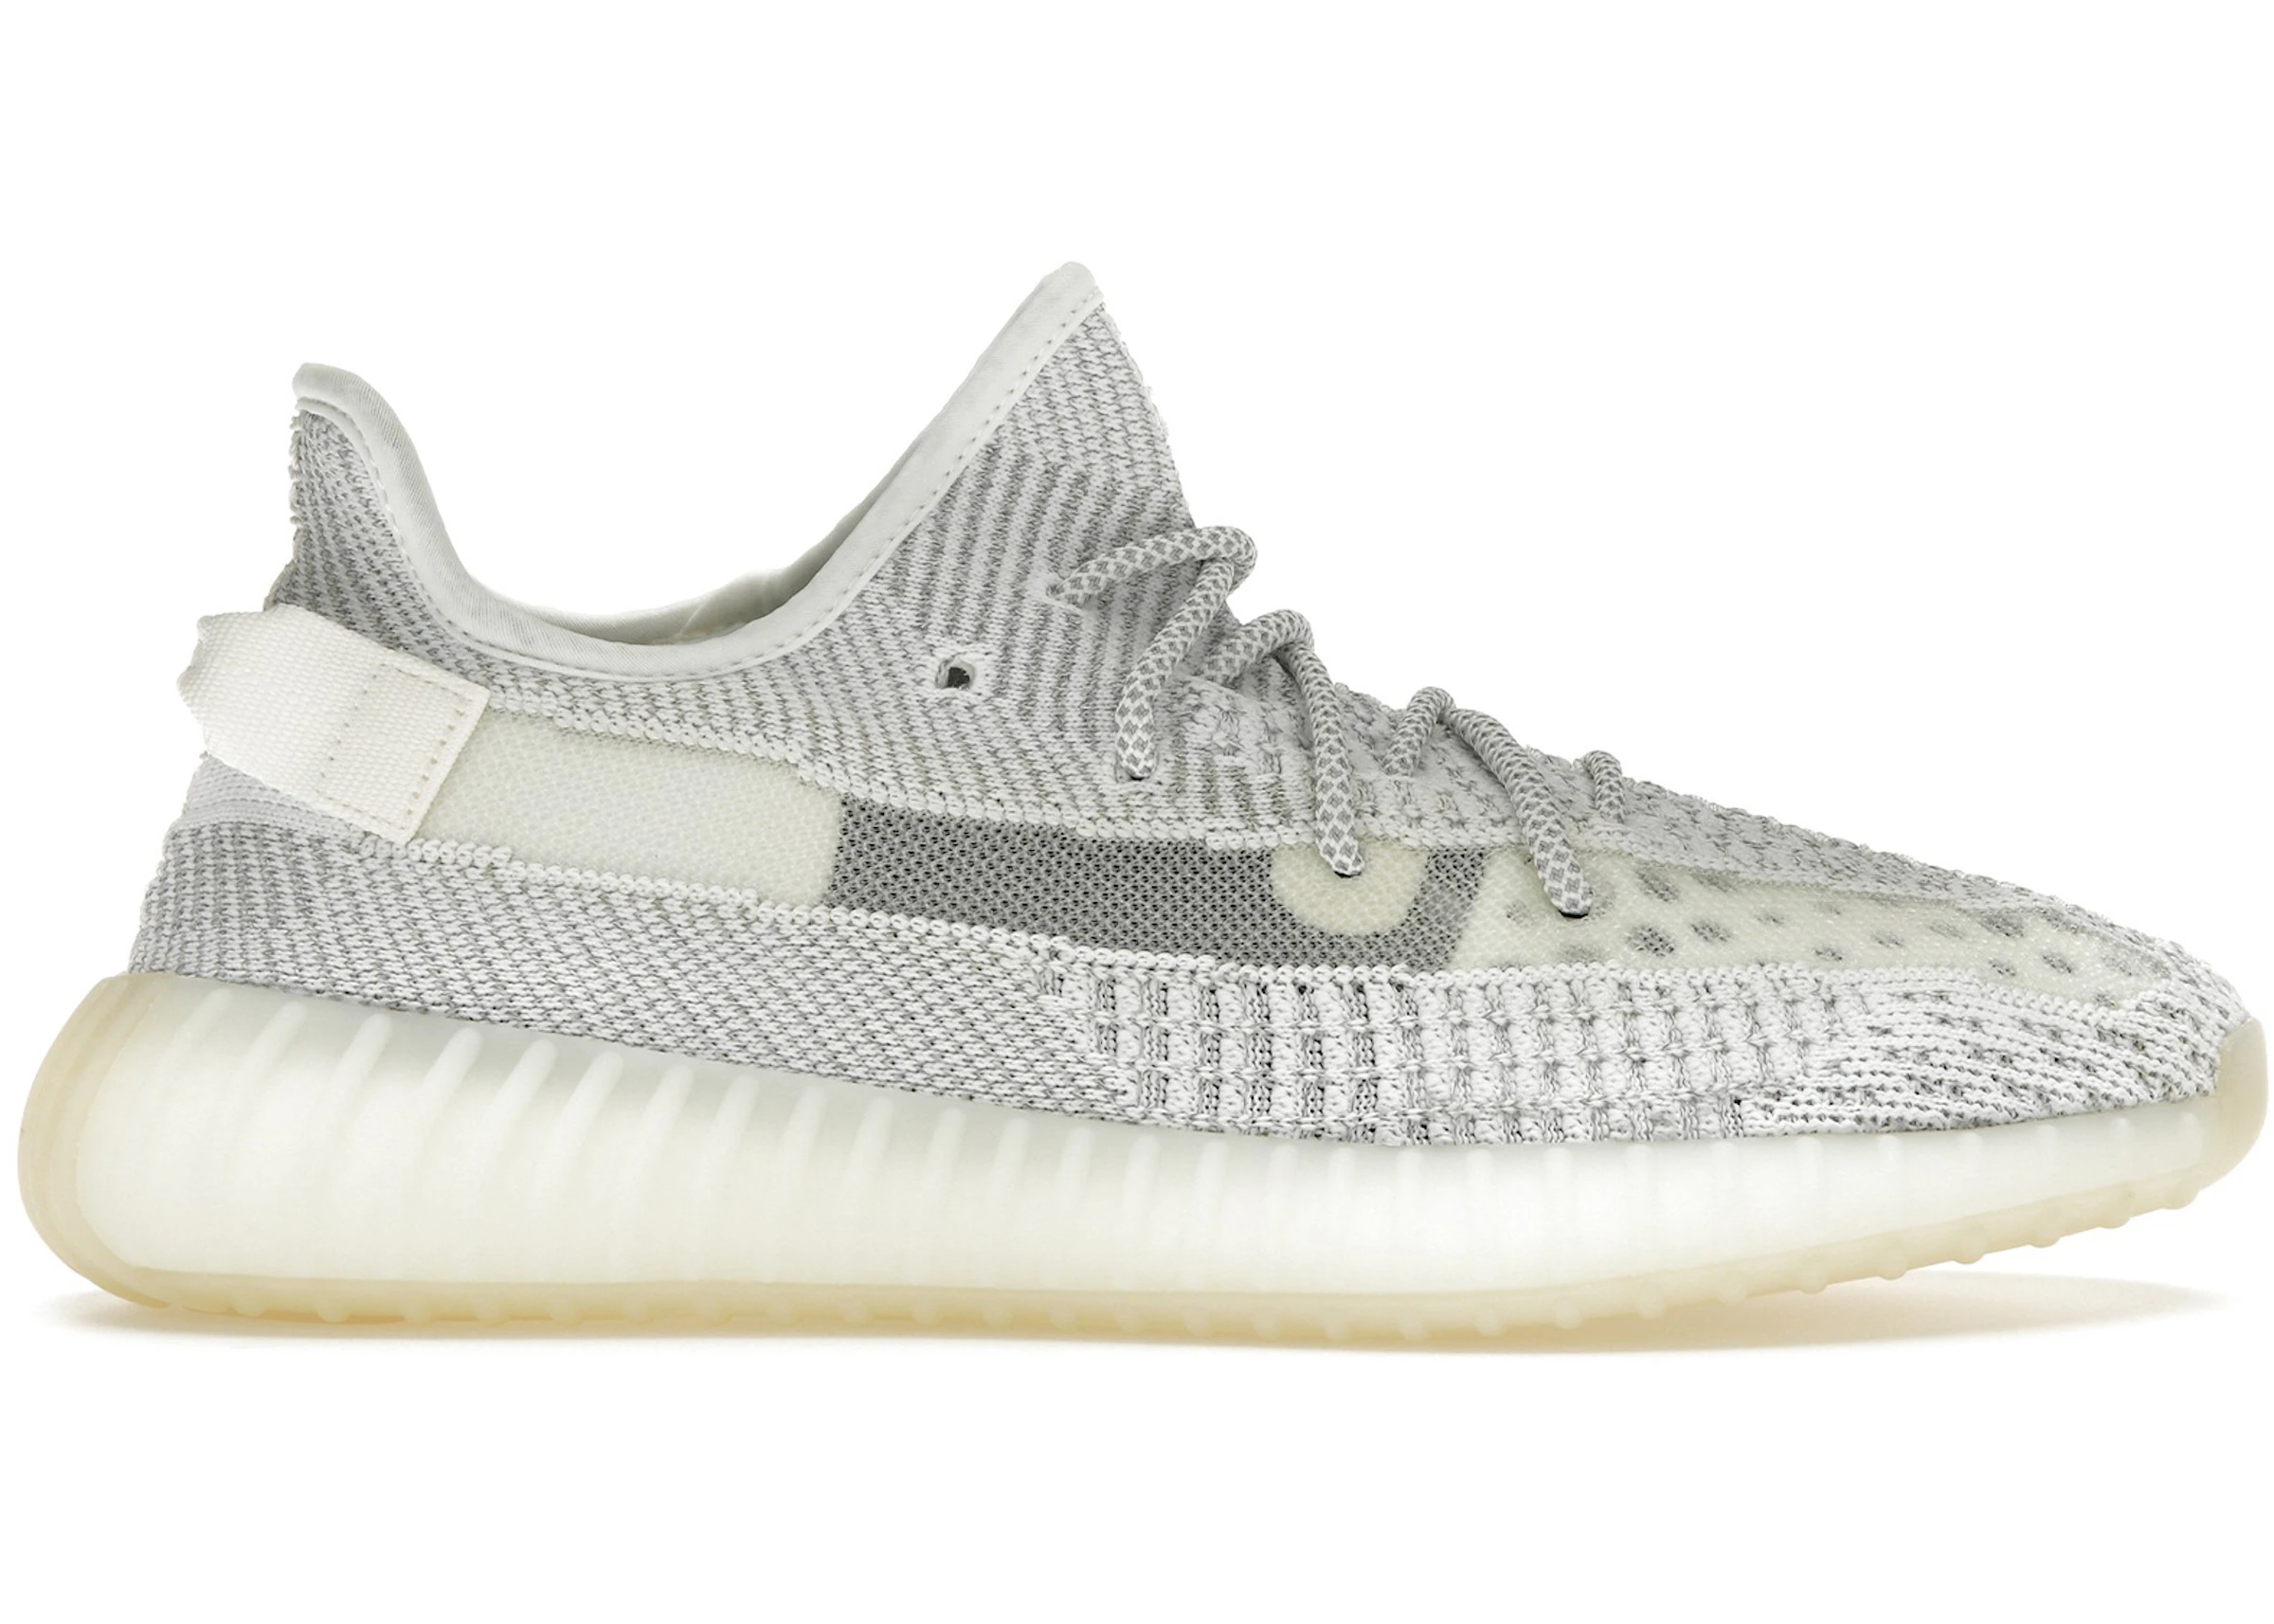 iets Afsnijden succes adidas Yeezy Boost 350 V2 Static Reflective - EF2367 - US